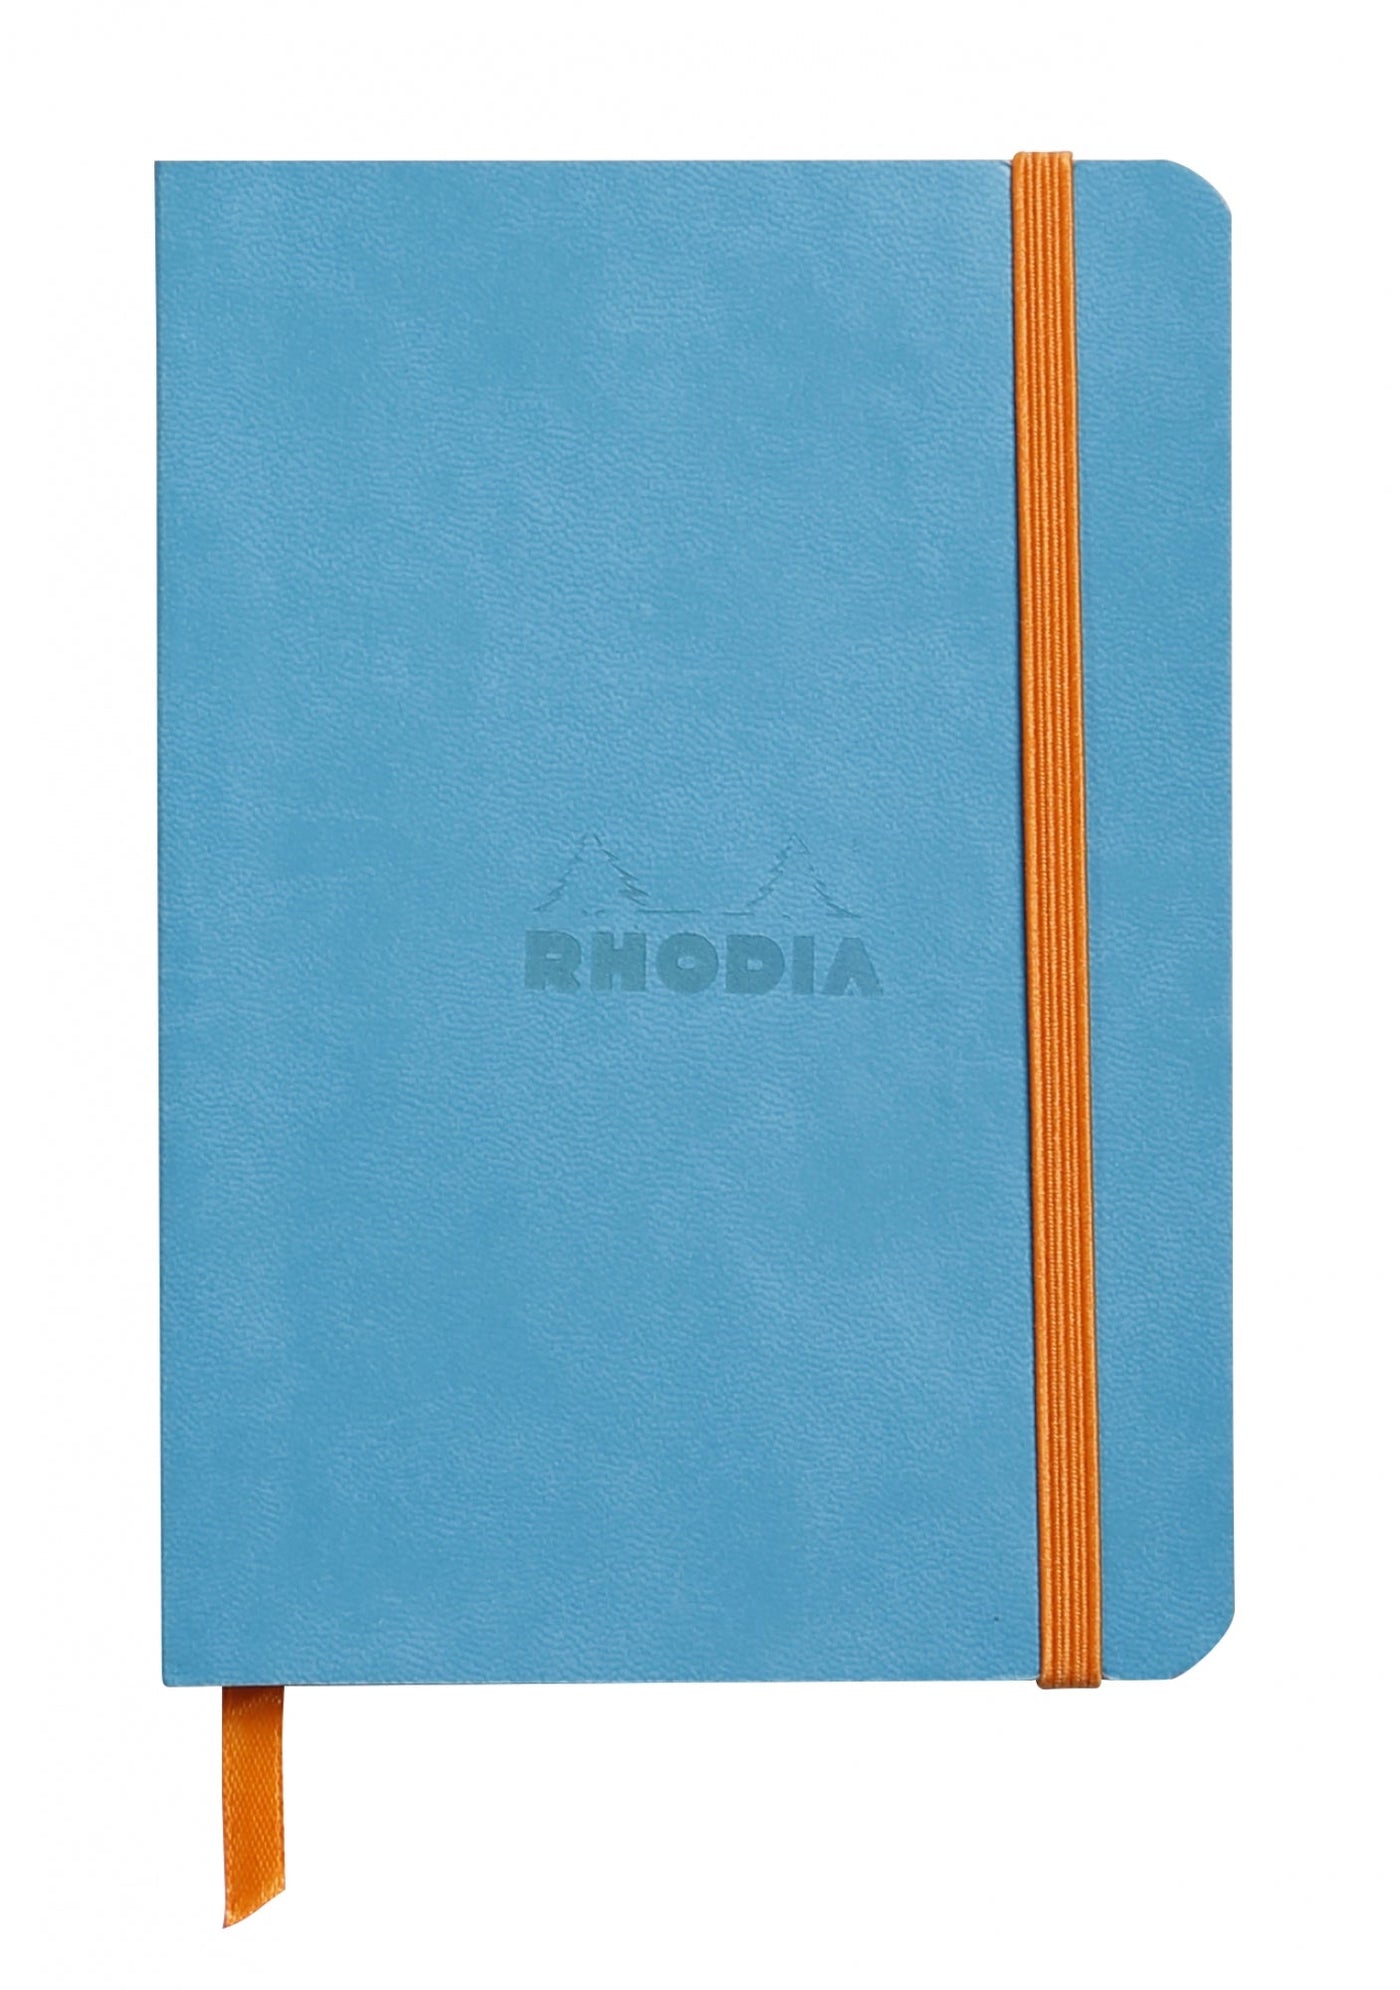 Rhodia Rhodiarama Turquoise A6 Soft Cover Dotted Notebook